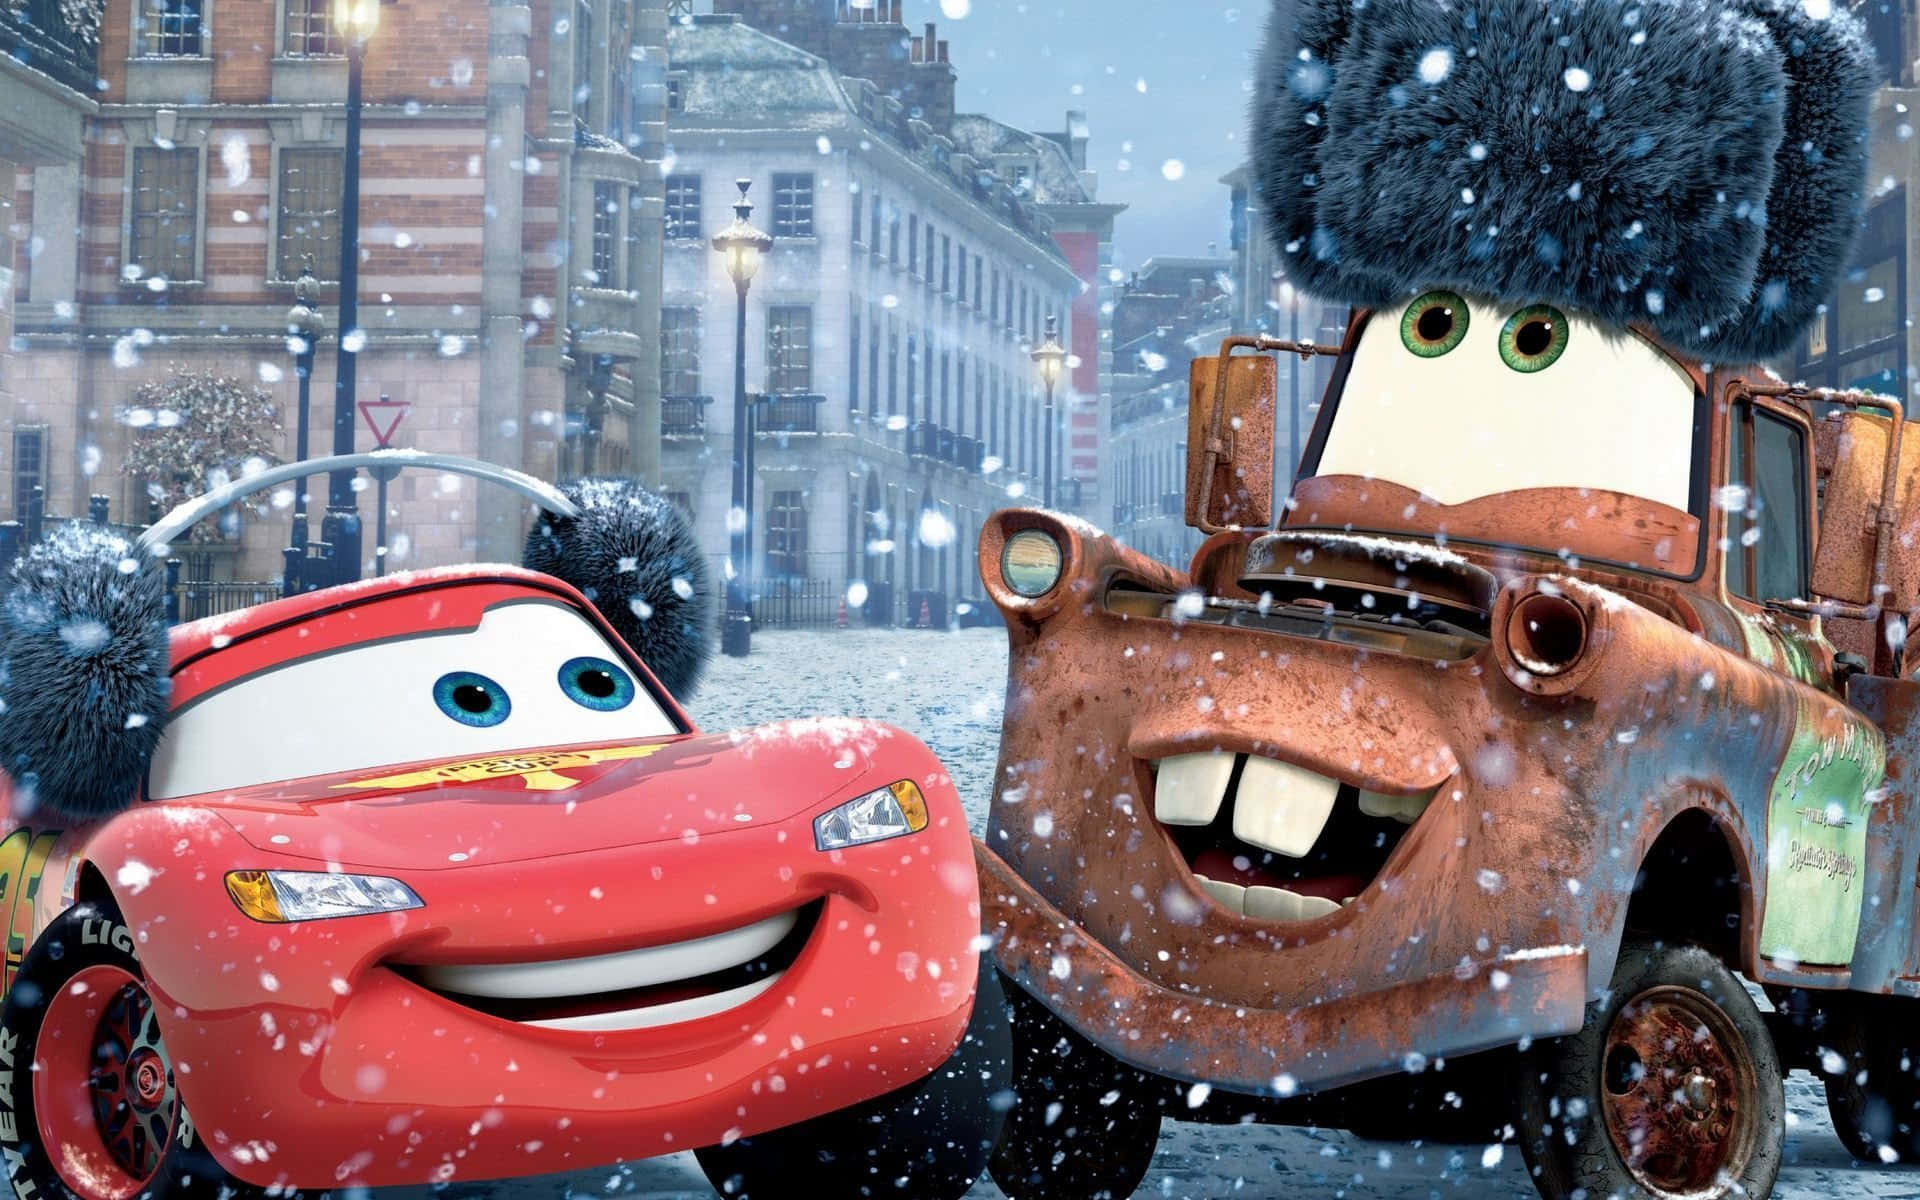 Lightning McQueen and Mater on an epic racing adventure